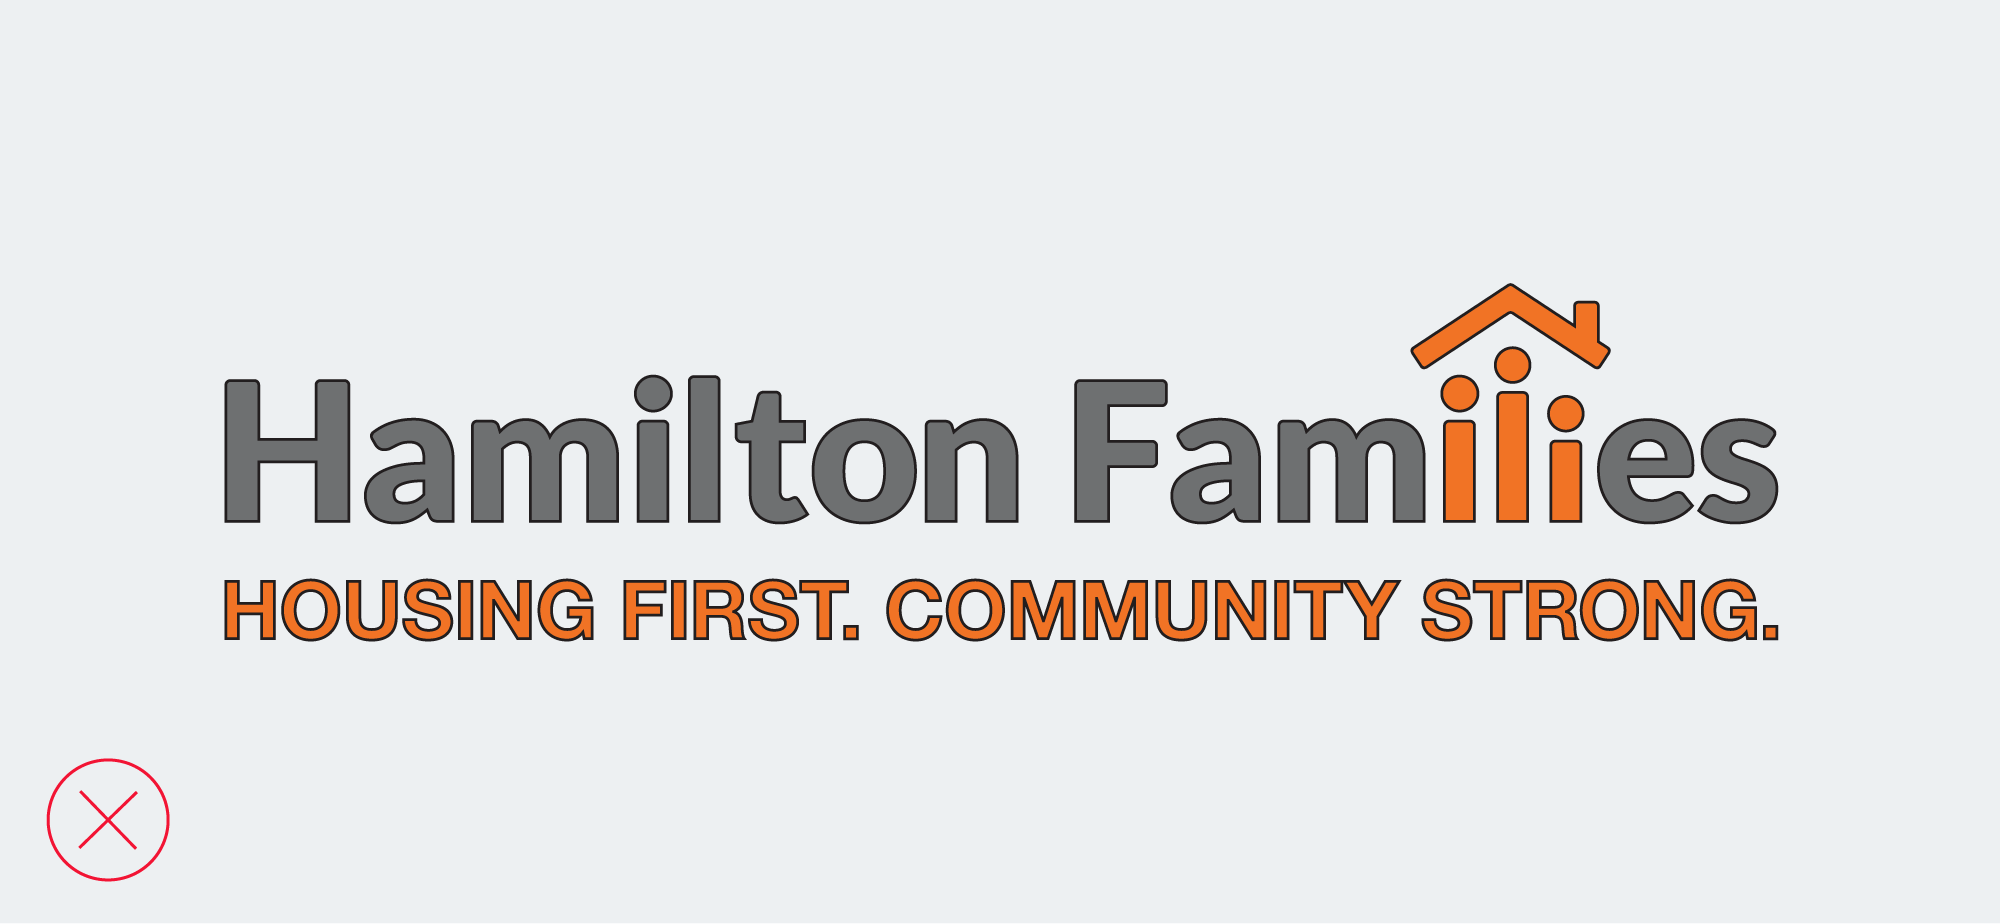 hamilton-families-brand-guidelines_logos-incorrect-usage-06.png